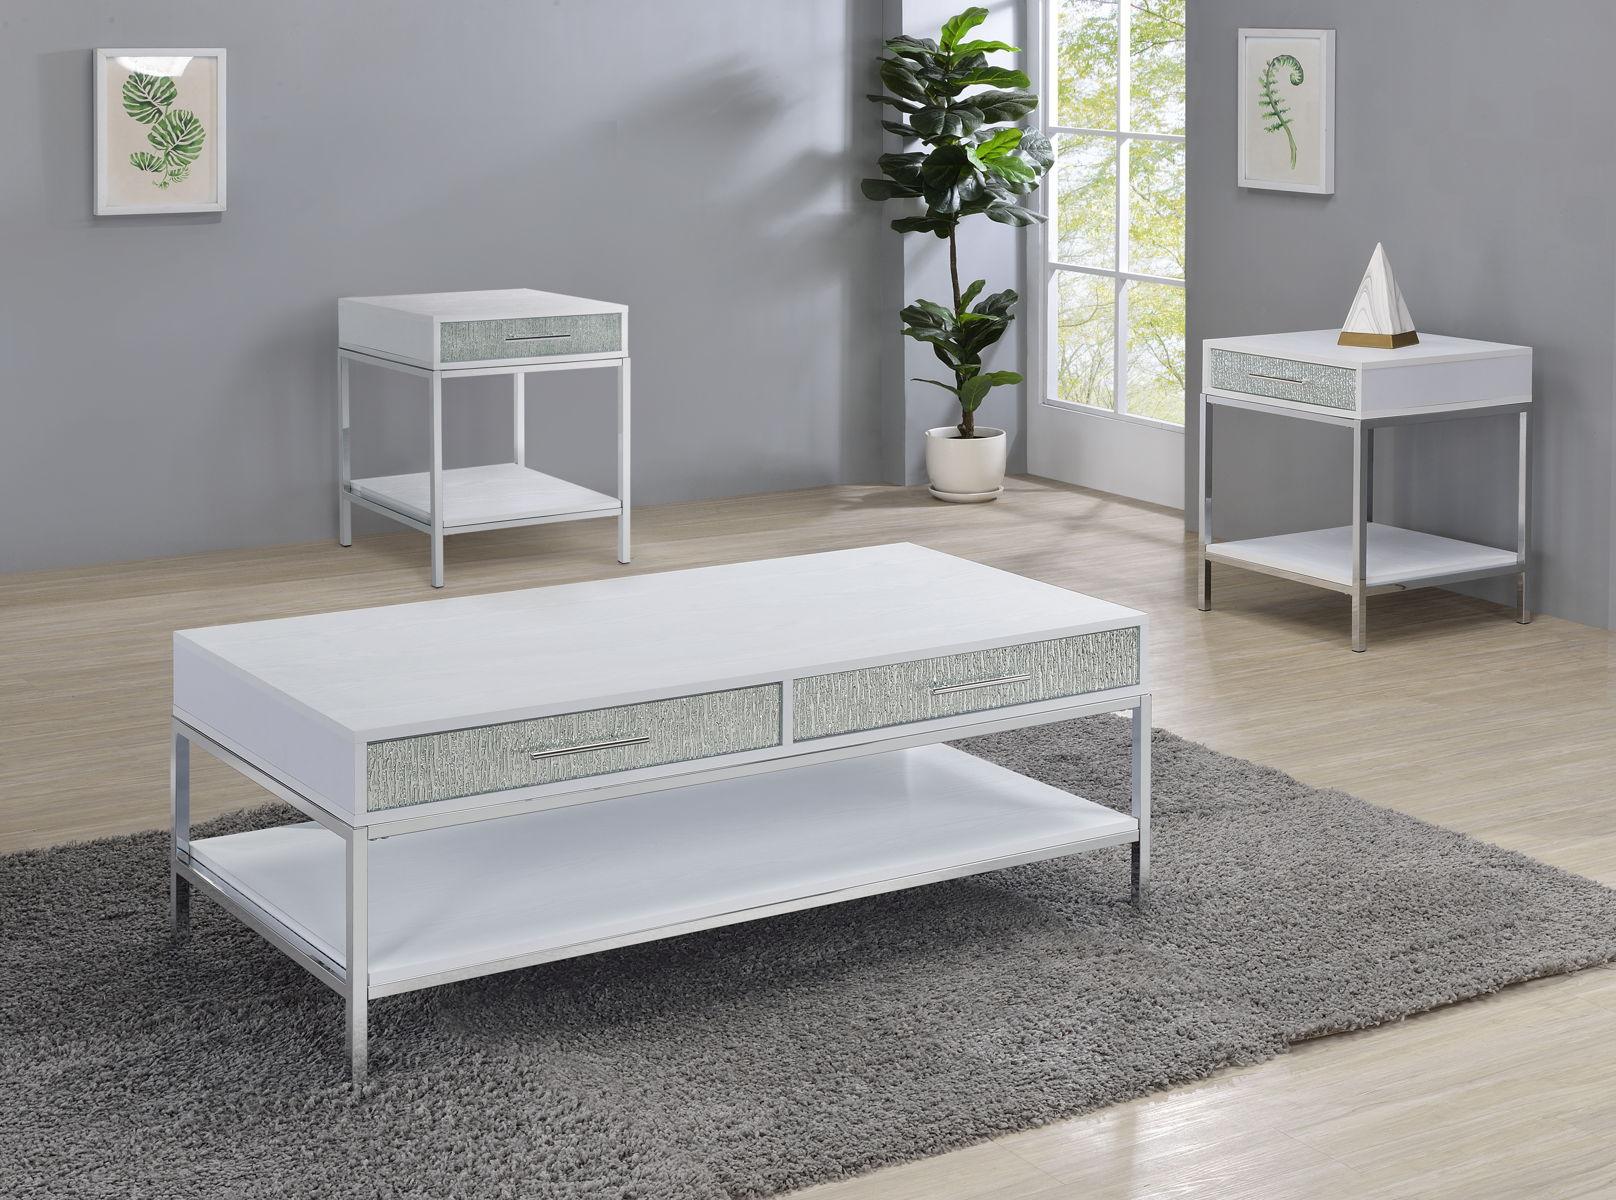 Steve Silver Furniture - Mirage - 3 Piece Table Set (Cocktail & 2 End Tables) - White - 5th Avenue Furniture